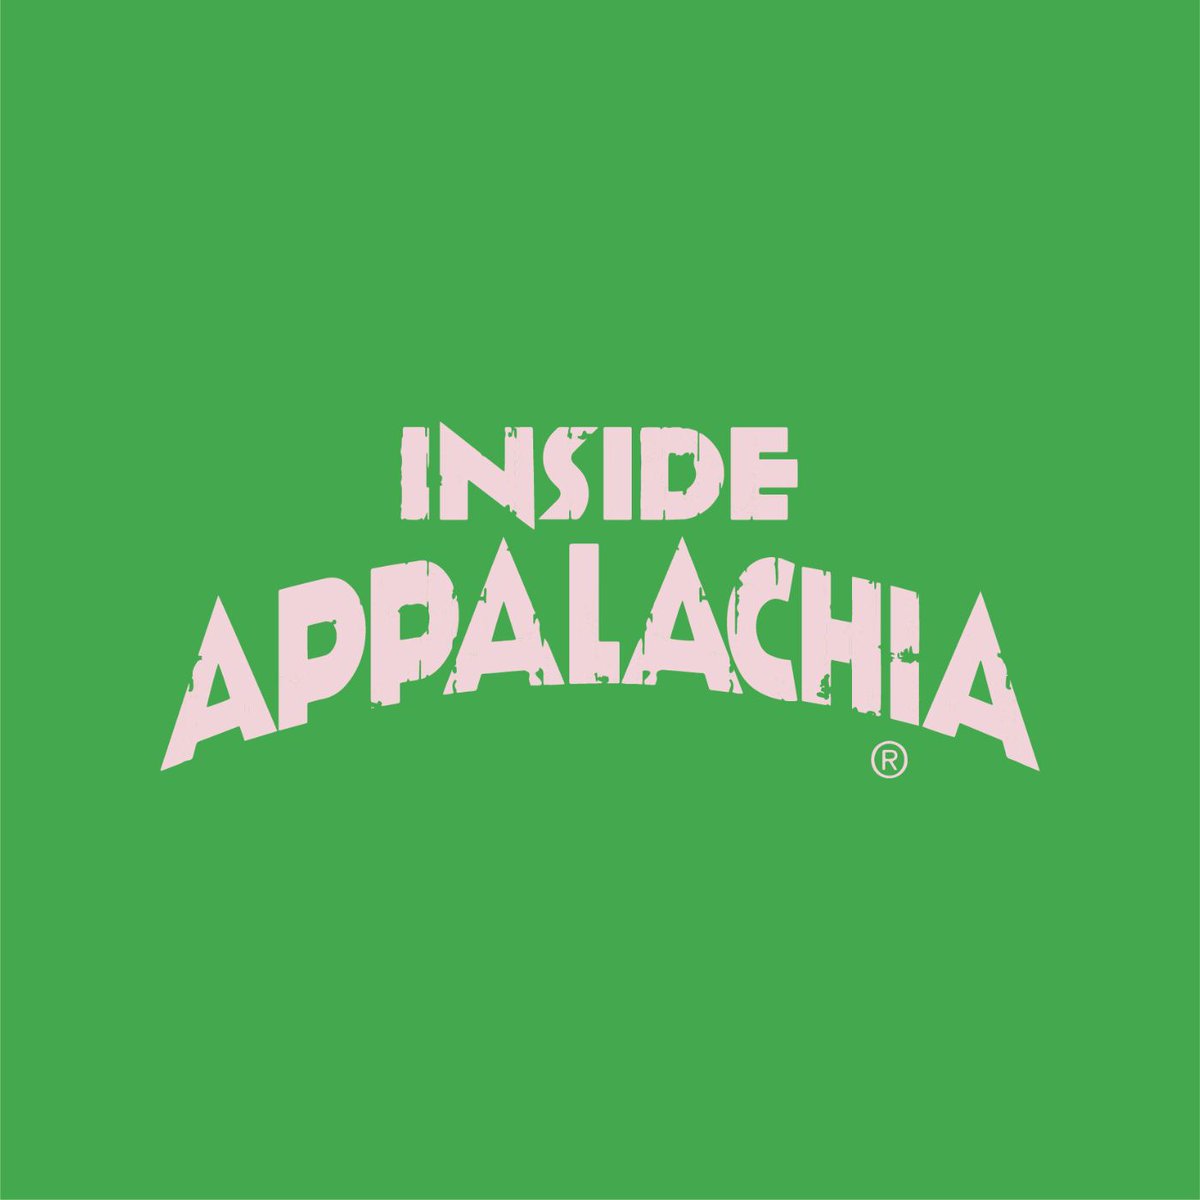 This week on #InsideAppalachia 🌄, a pair of former miners found love shoveling coal and shaped a life making wooden spoons. 🥄 We learn about treenware. Also, NASCAR Hall of Famer Leonard Wood shares stories, and a bit of advice. Listen 🎧 SUNDAY at 7AM & 6PM on @wvpublic.